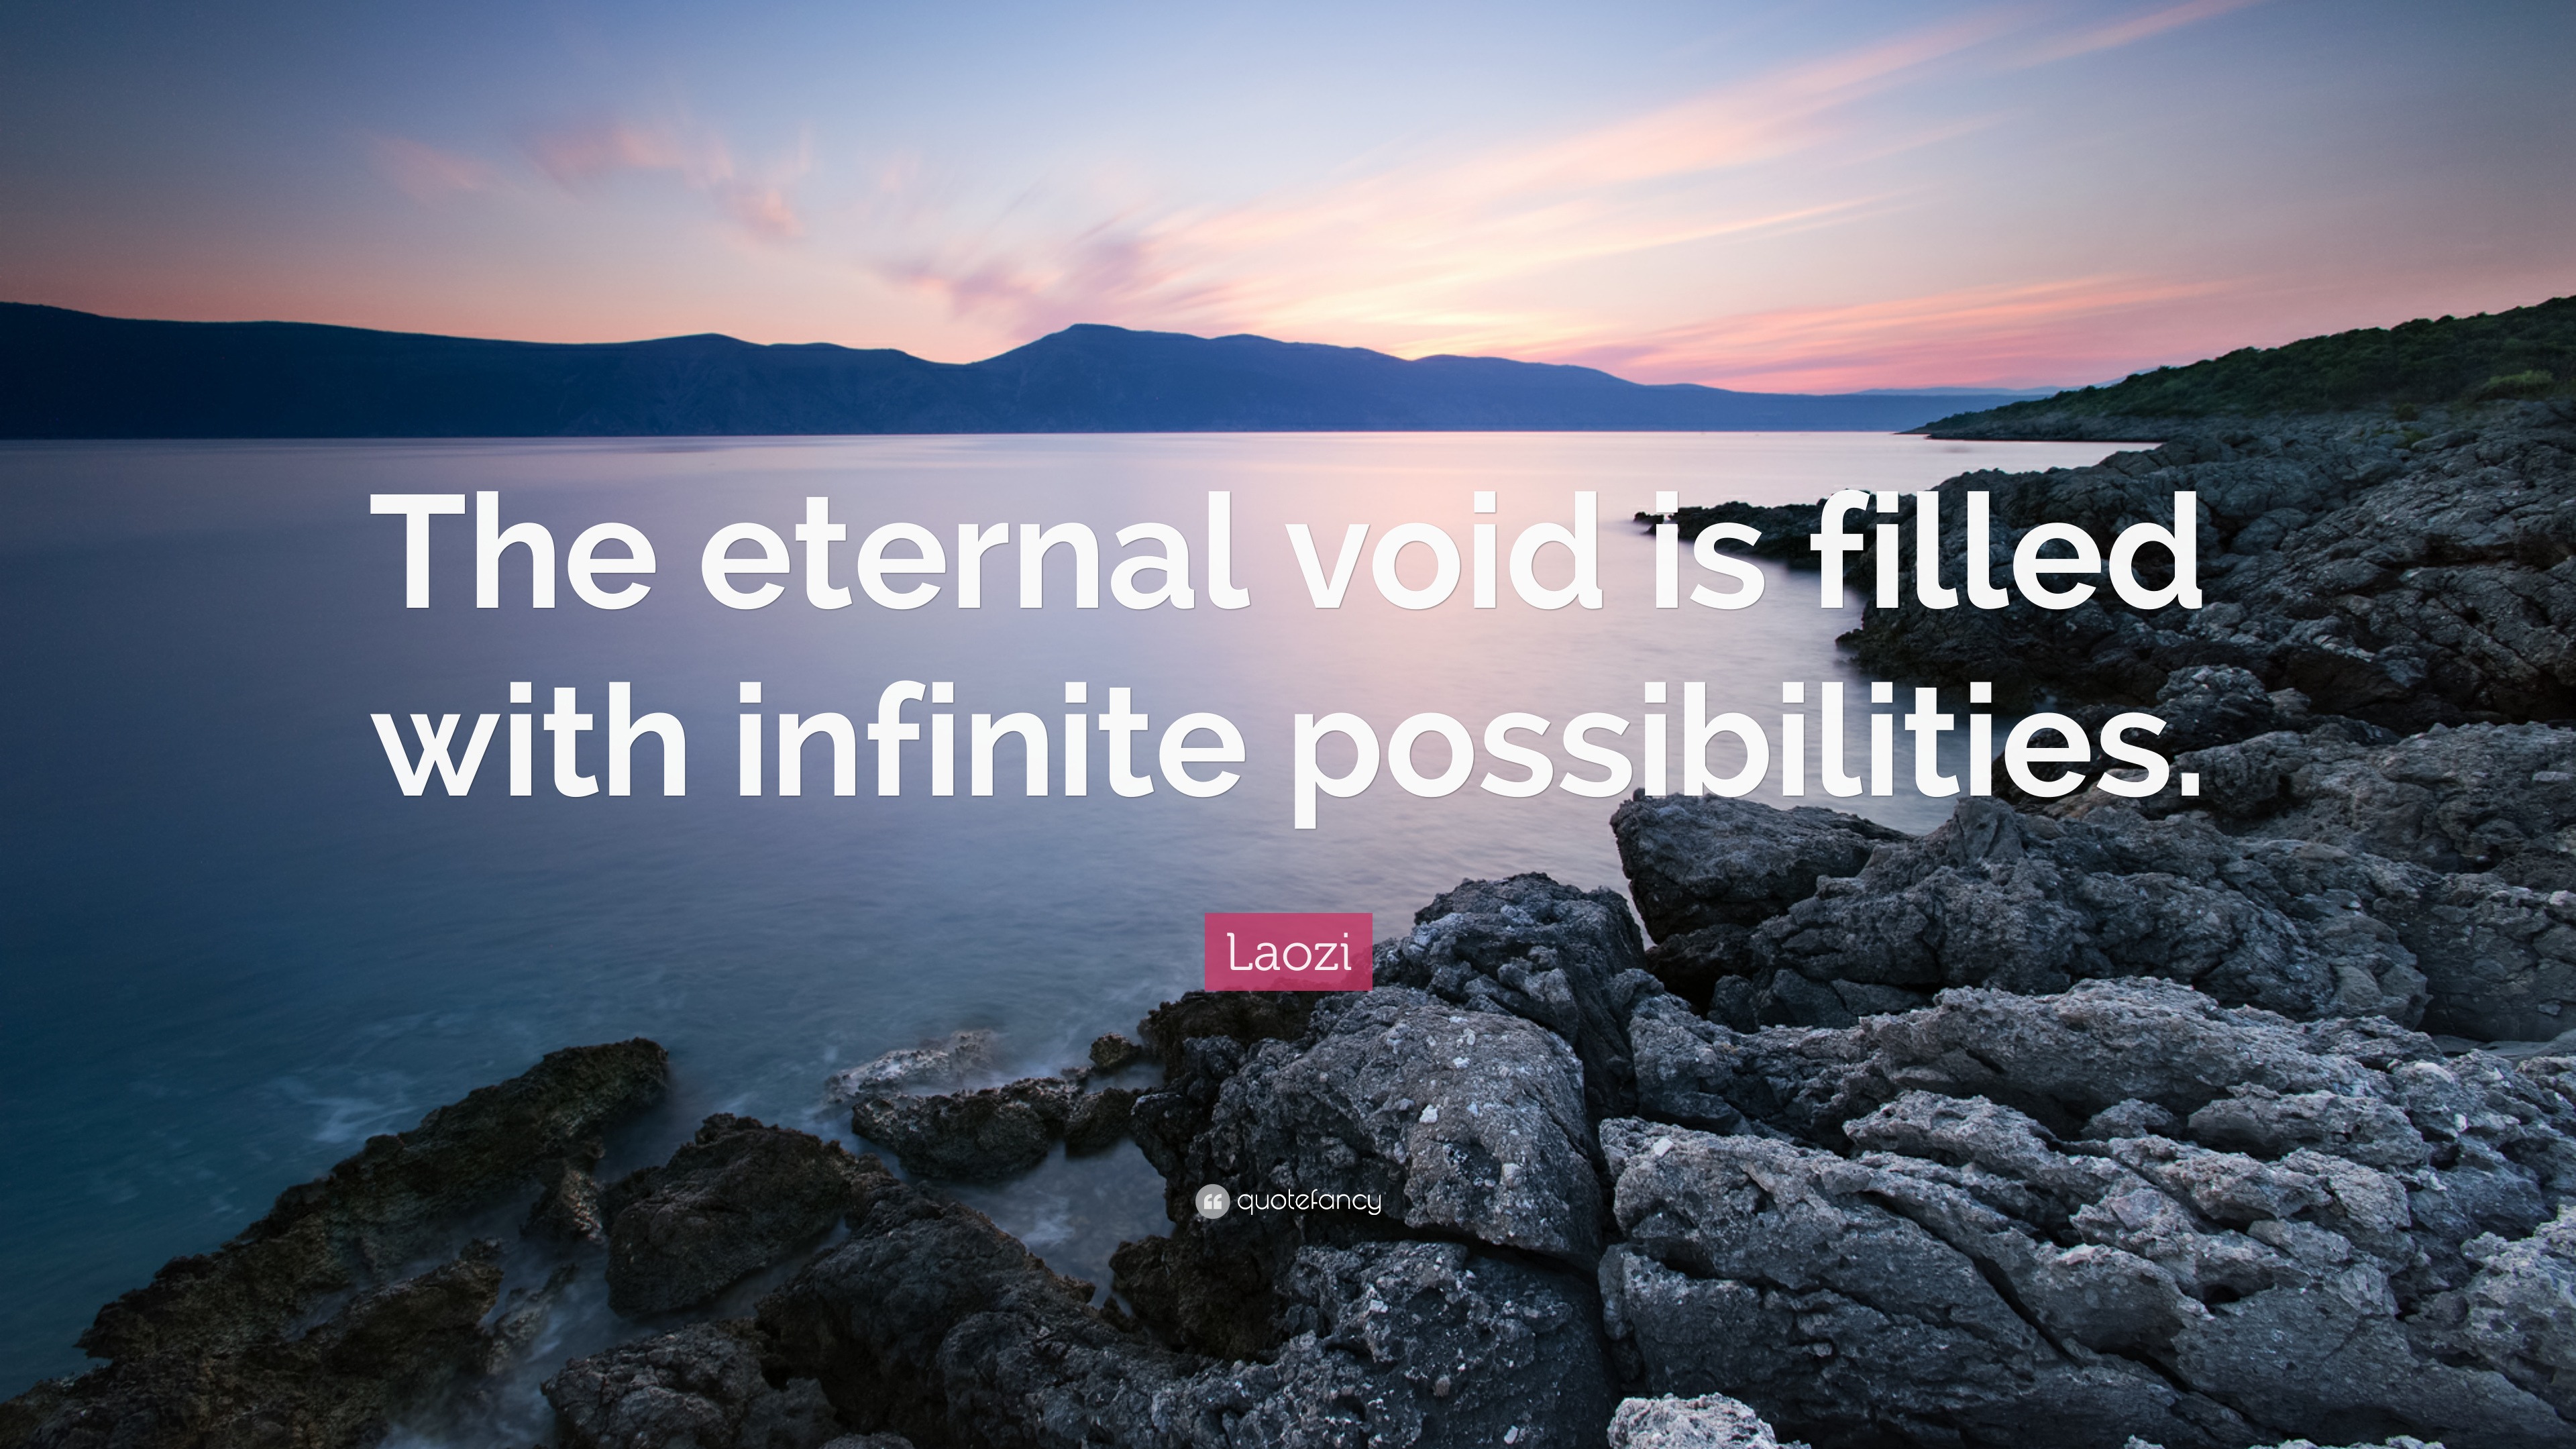 Laozi Quote: “The eternal void is filled with infinite possibilities.”